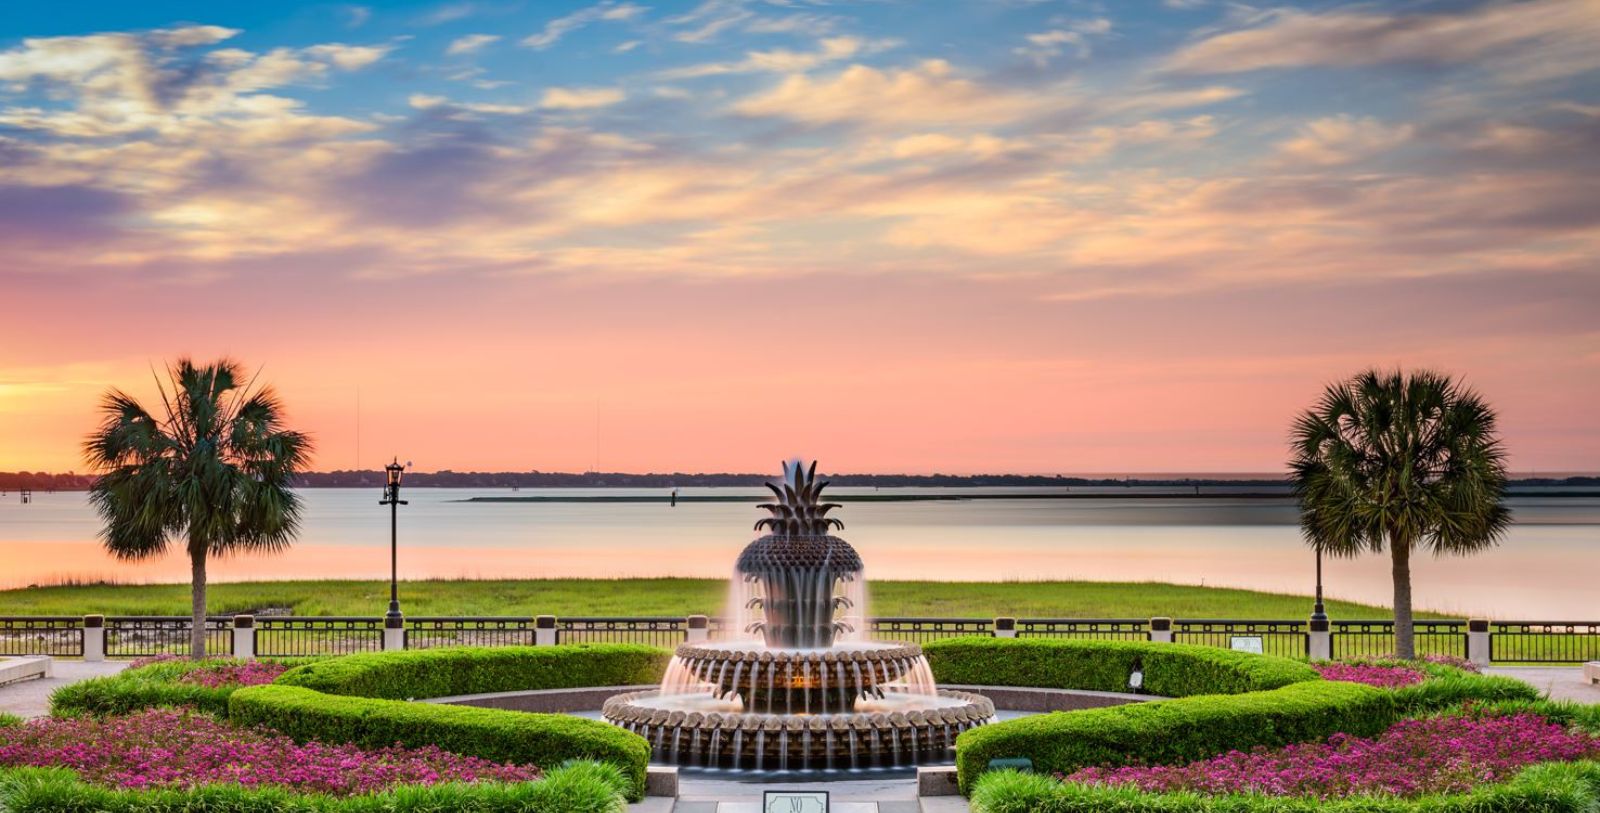 Explore some of Charleston’s most renowned landmarks, like the Magnolia Plantation and Gardens, Fort Sumter National Monument, and the technicolor homes of Rainbow Row.